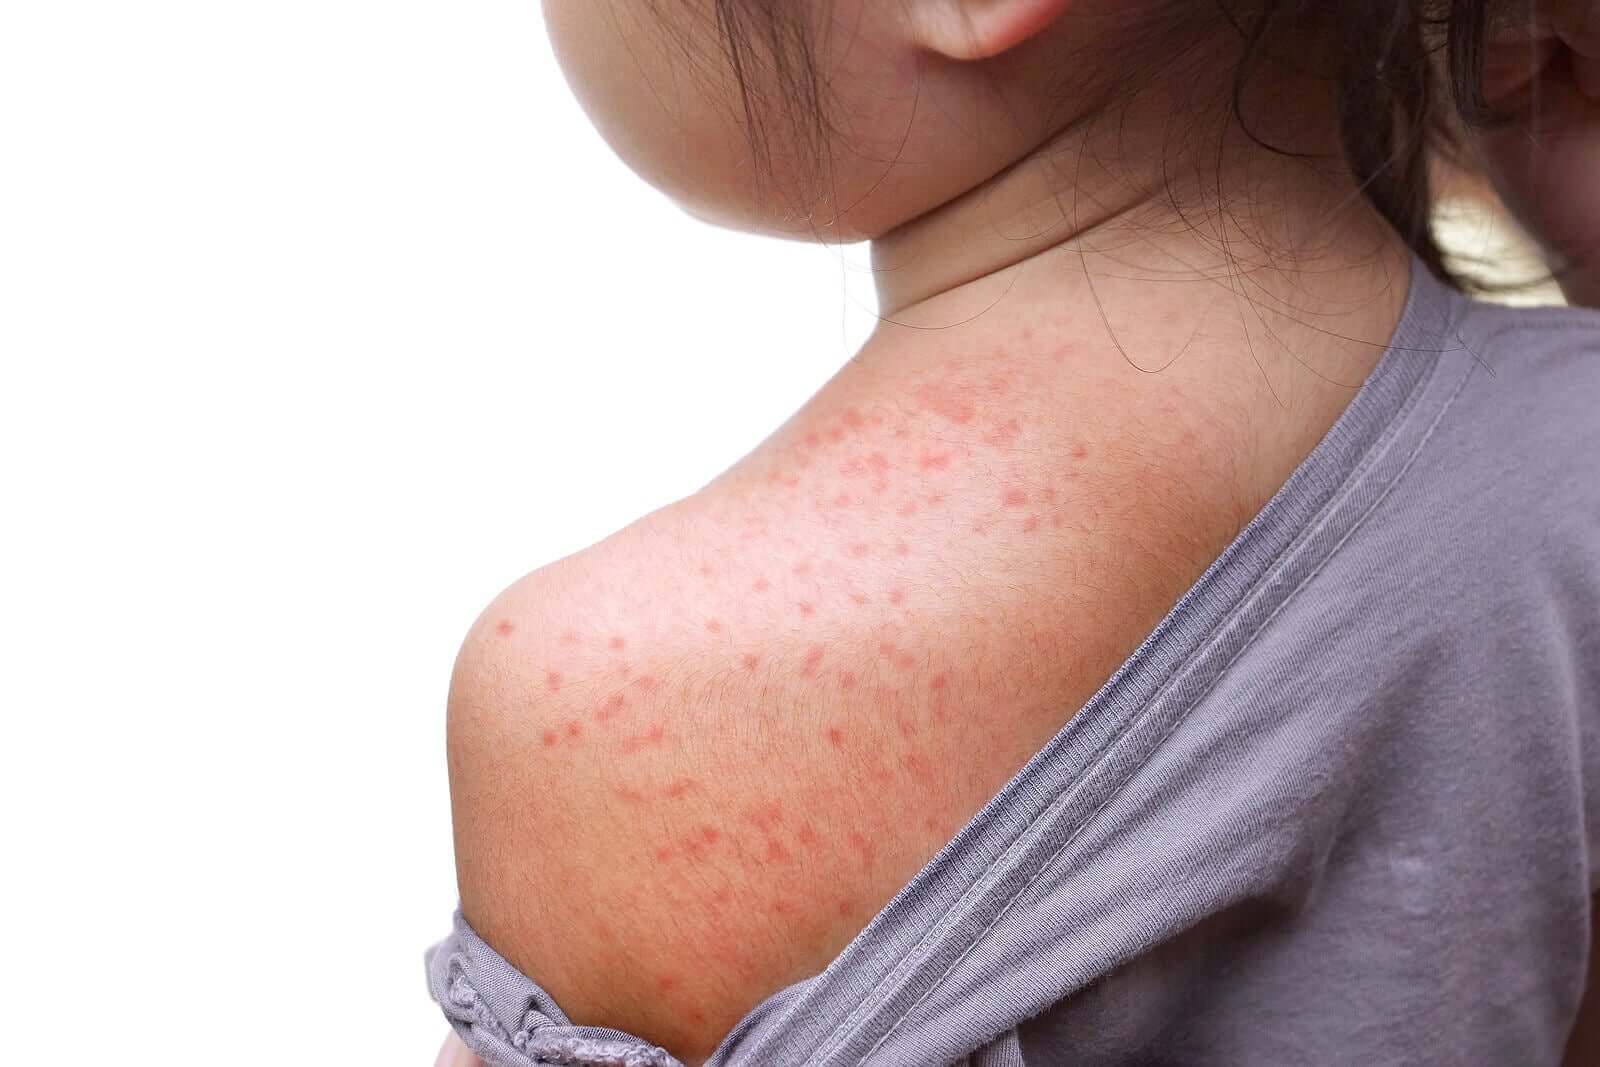 A young girl with red spots on her back and shoulders.